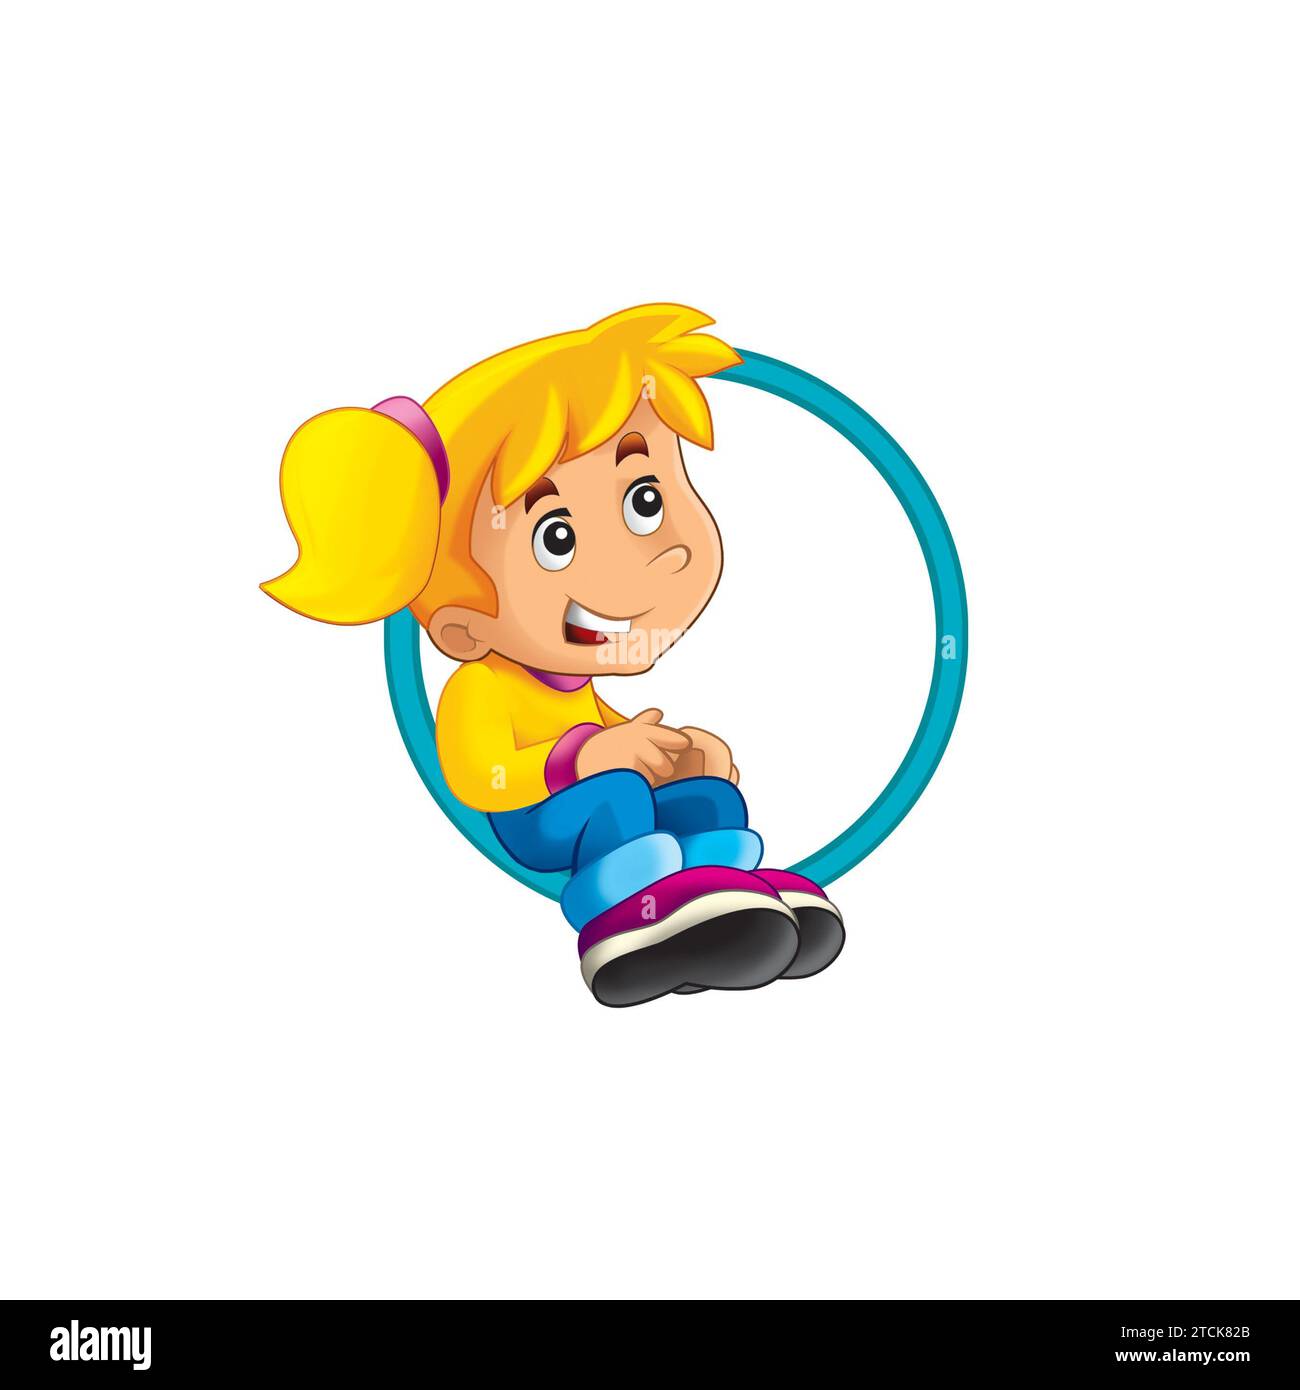 cartoon scene with young child with some childhood activity illustration on white background as button scene for kids Stock Photo